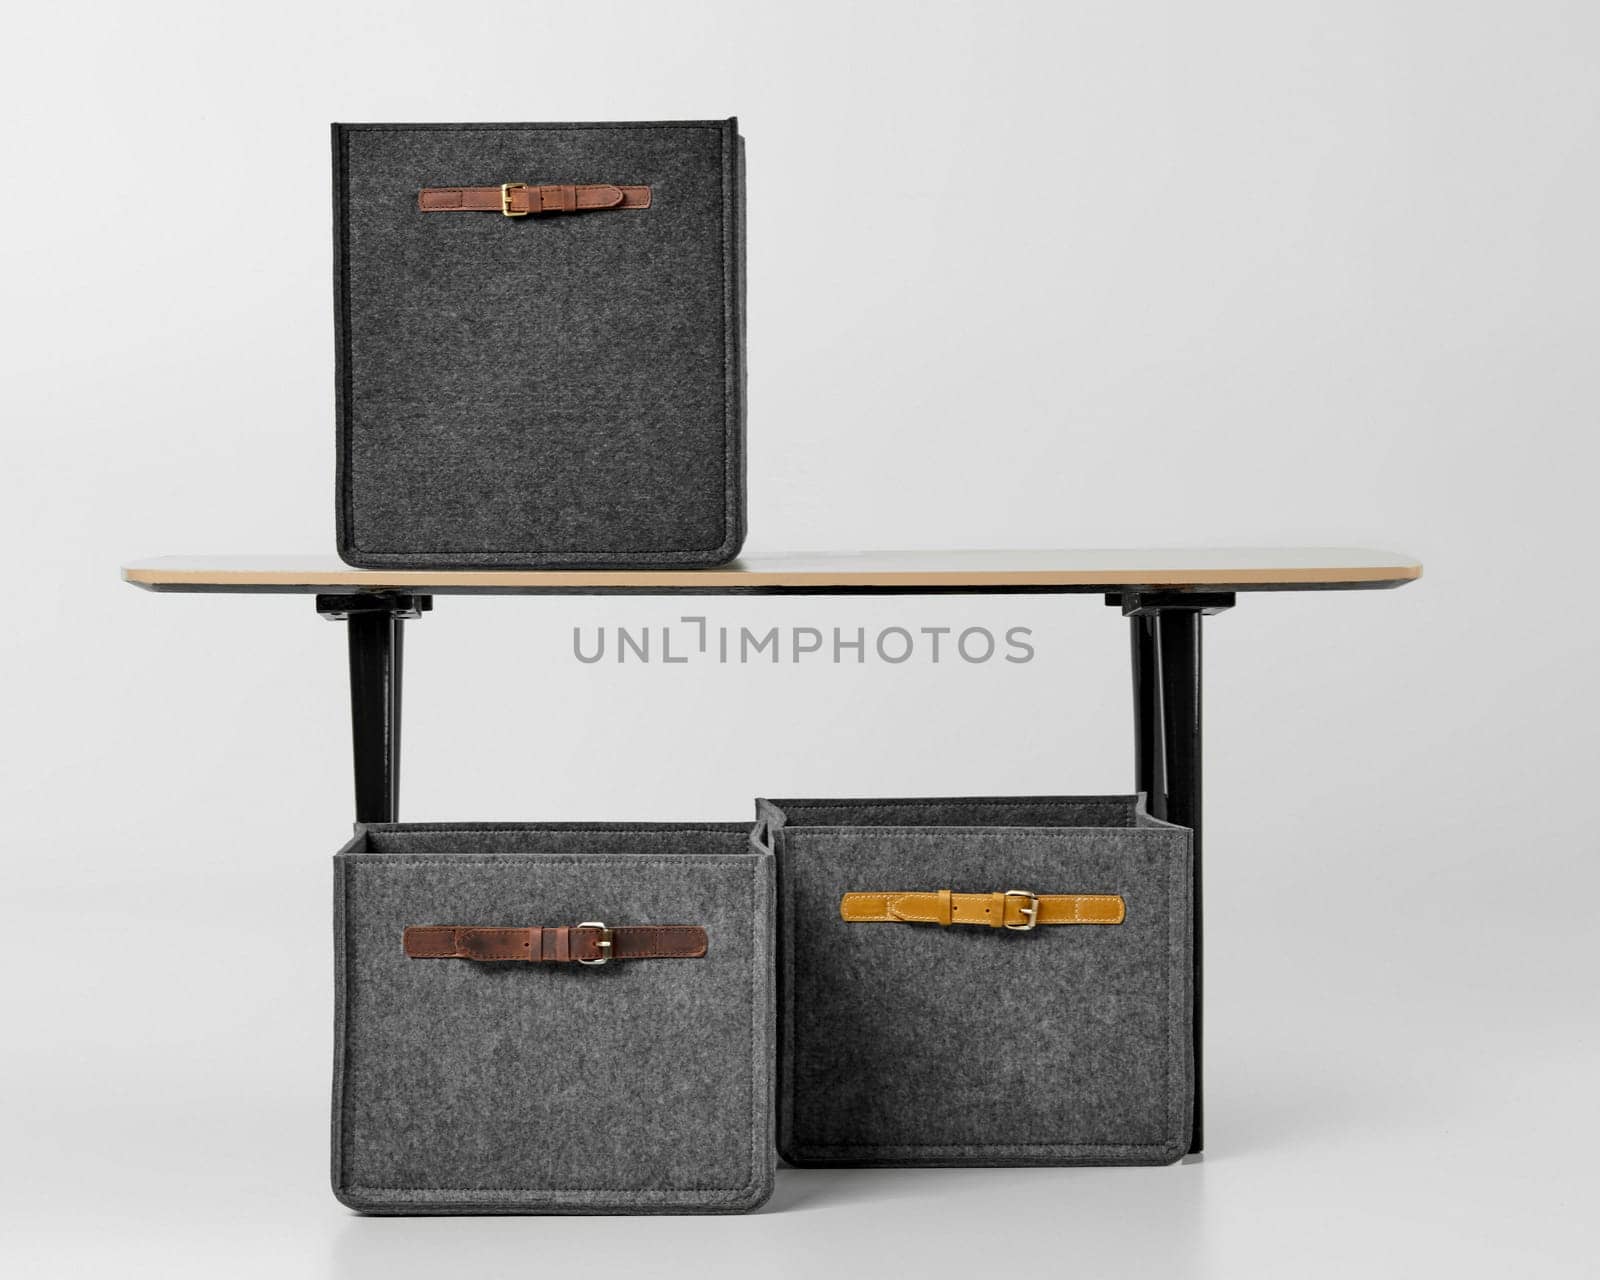 Handcrafted grey felt boxes with leather handles arranged by office desk by nazarovsergey